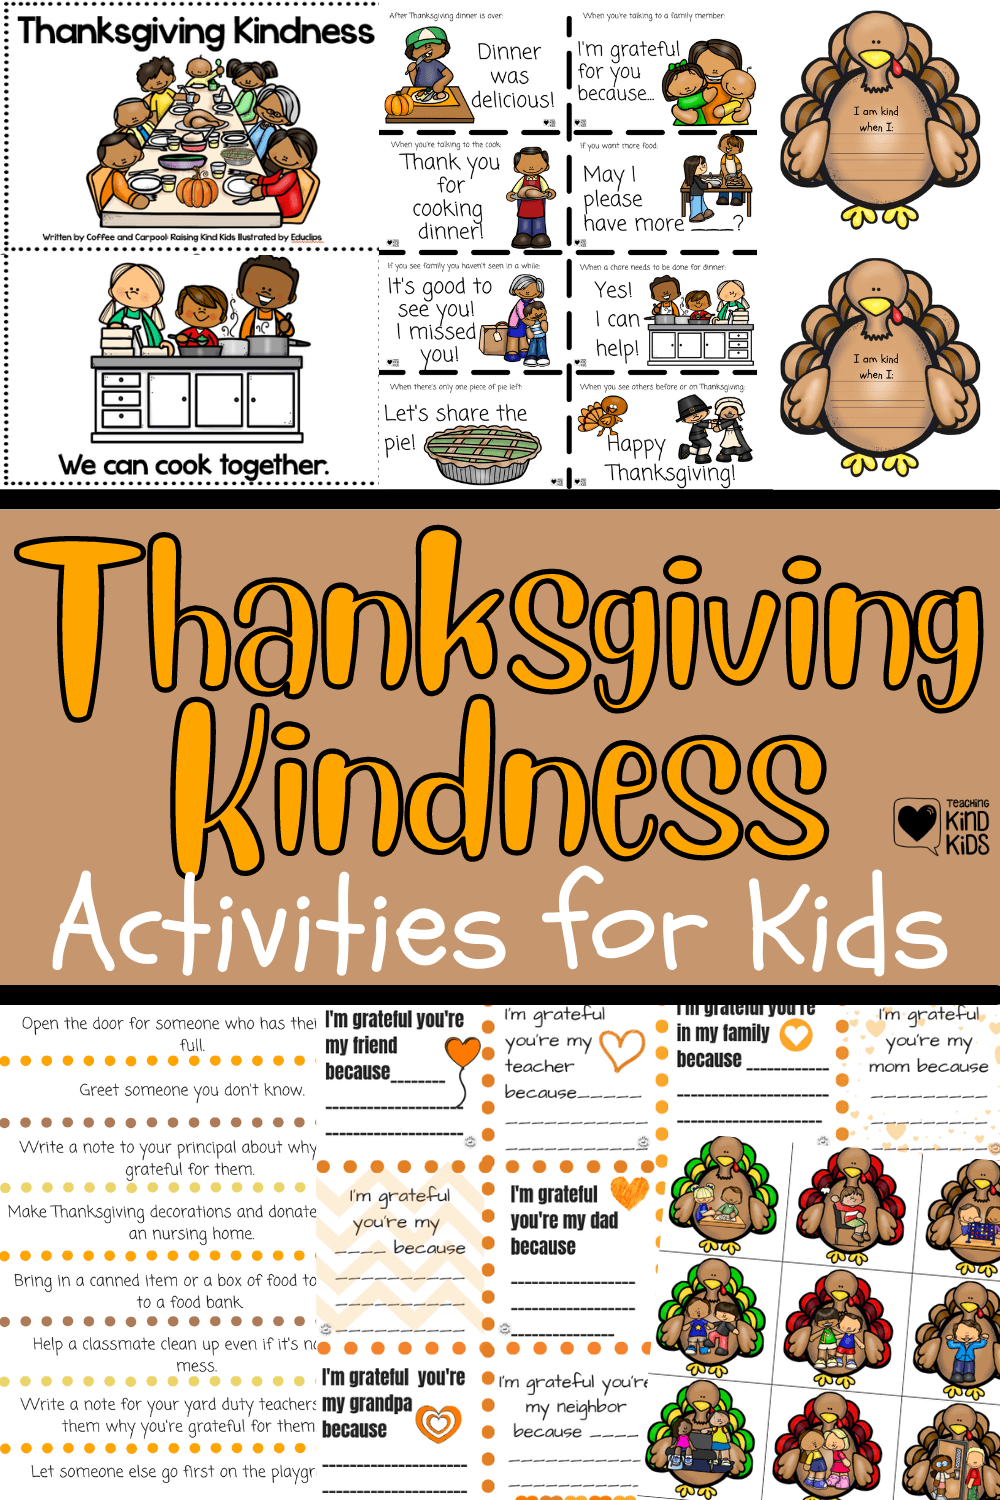 Use these Thanksgiving kindness activities for kids to focus on and spread kindness during November. 